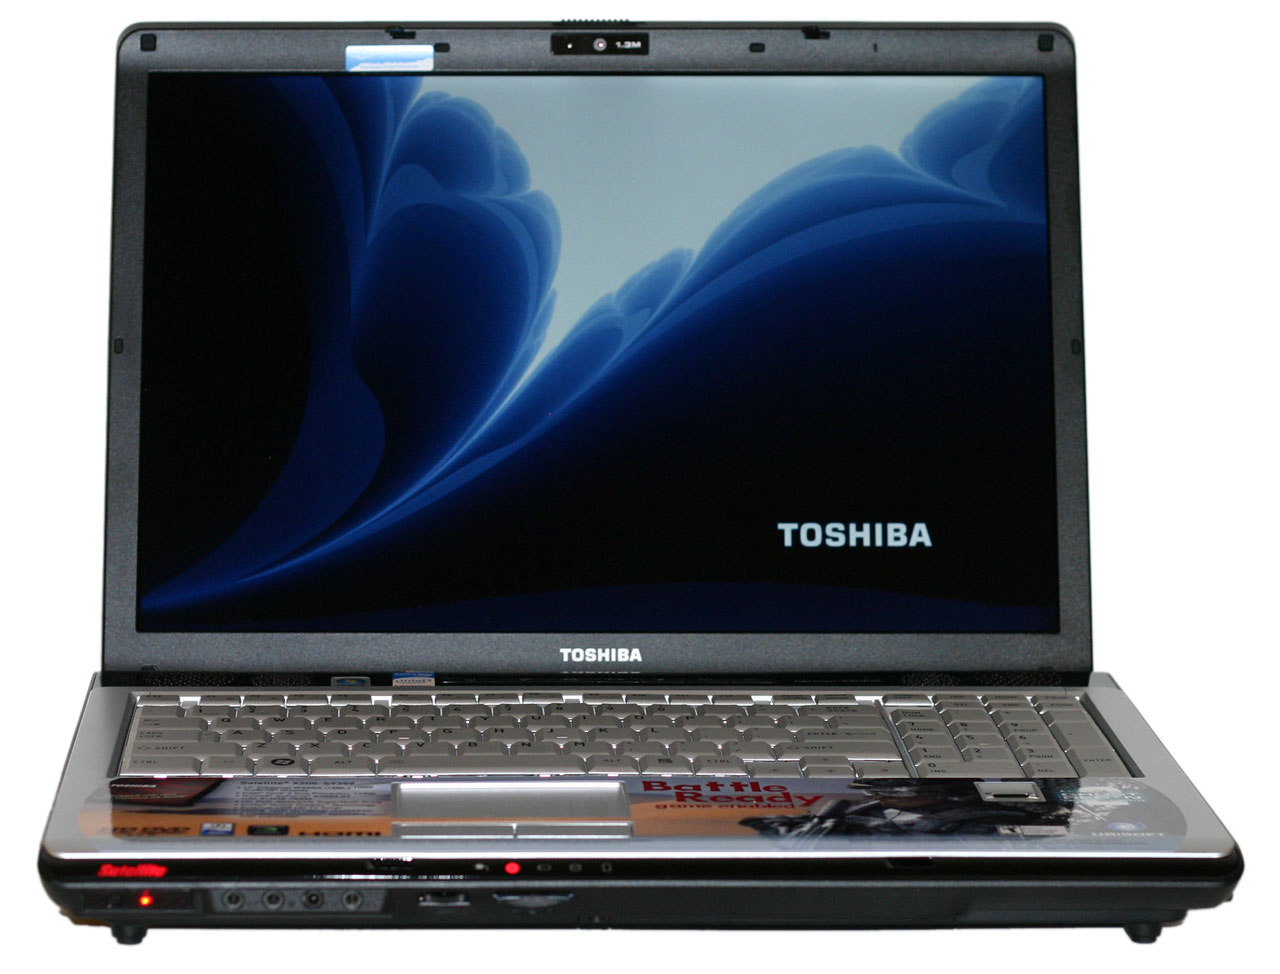 how to enable mouse on toshiba laptop